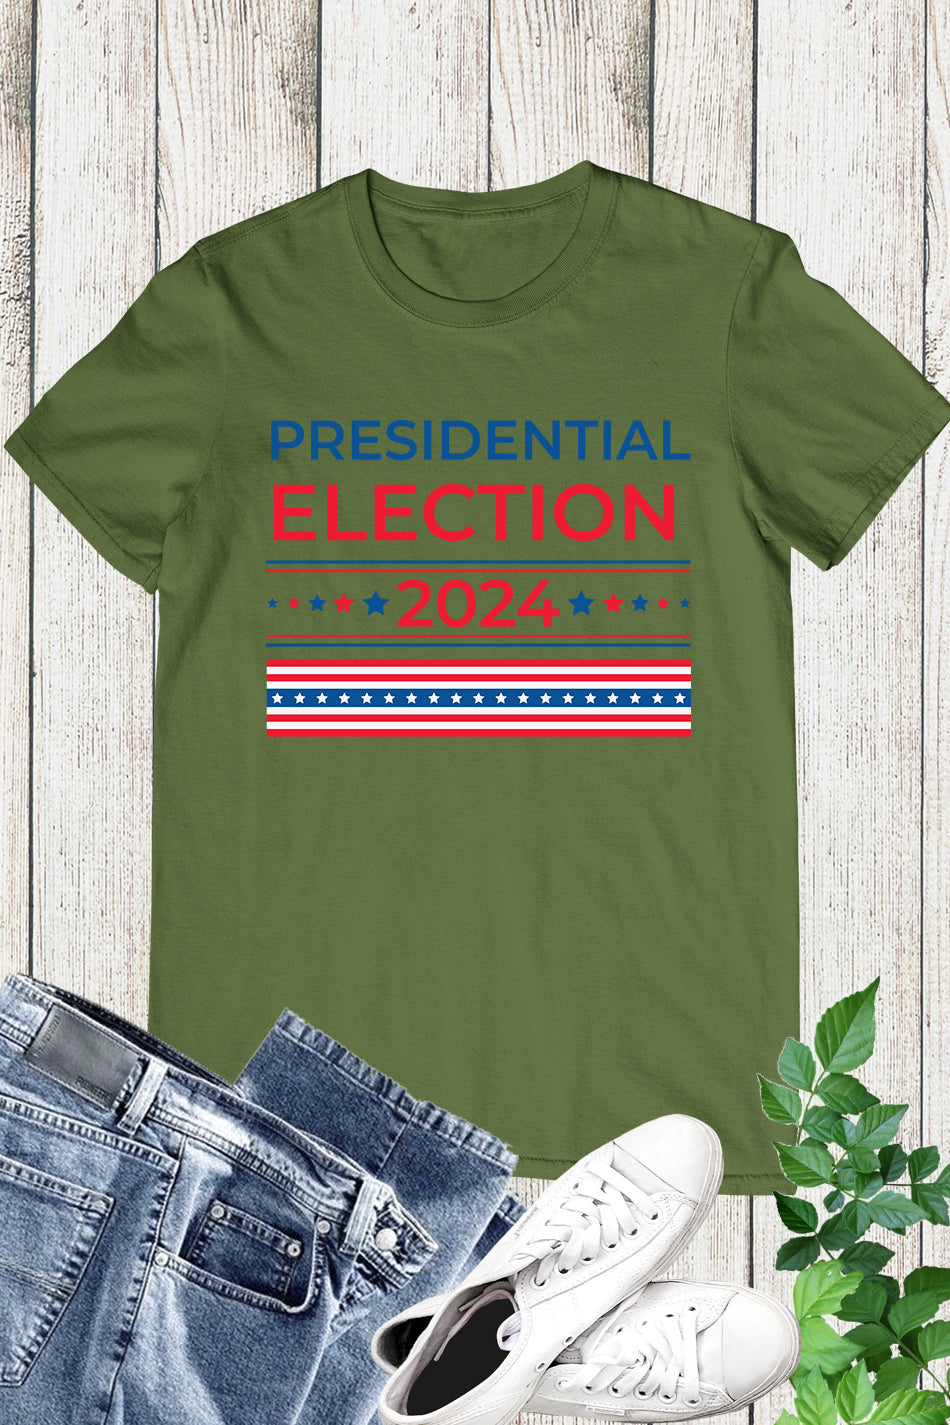 Vote Presidential Election 2024 USA T Shirt